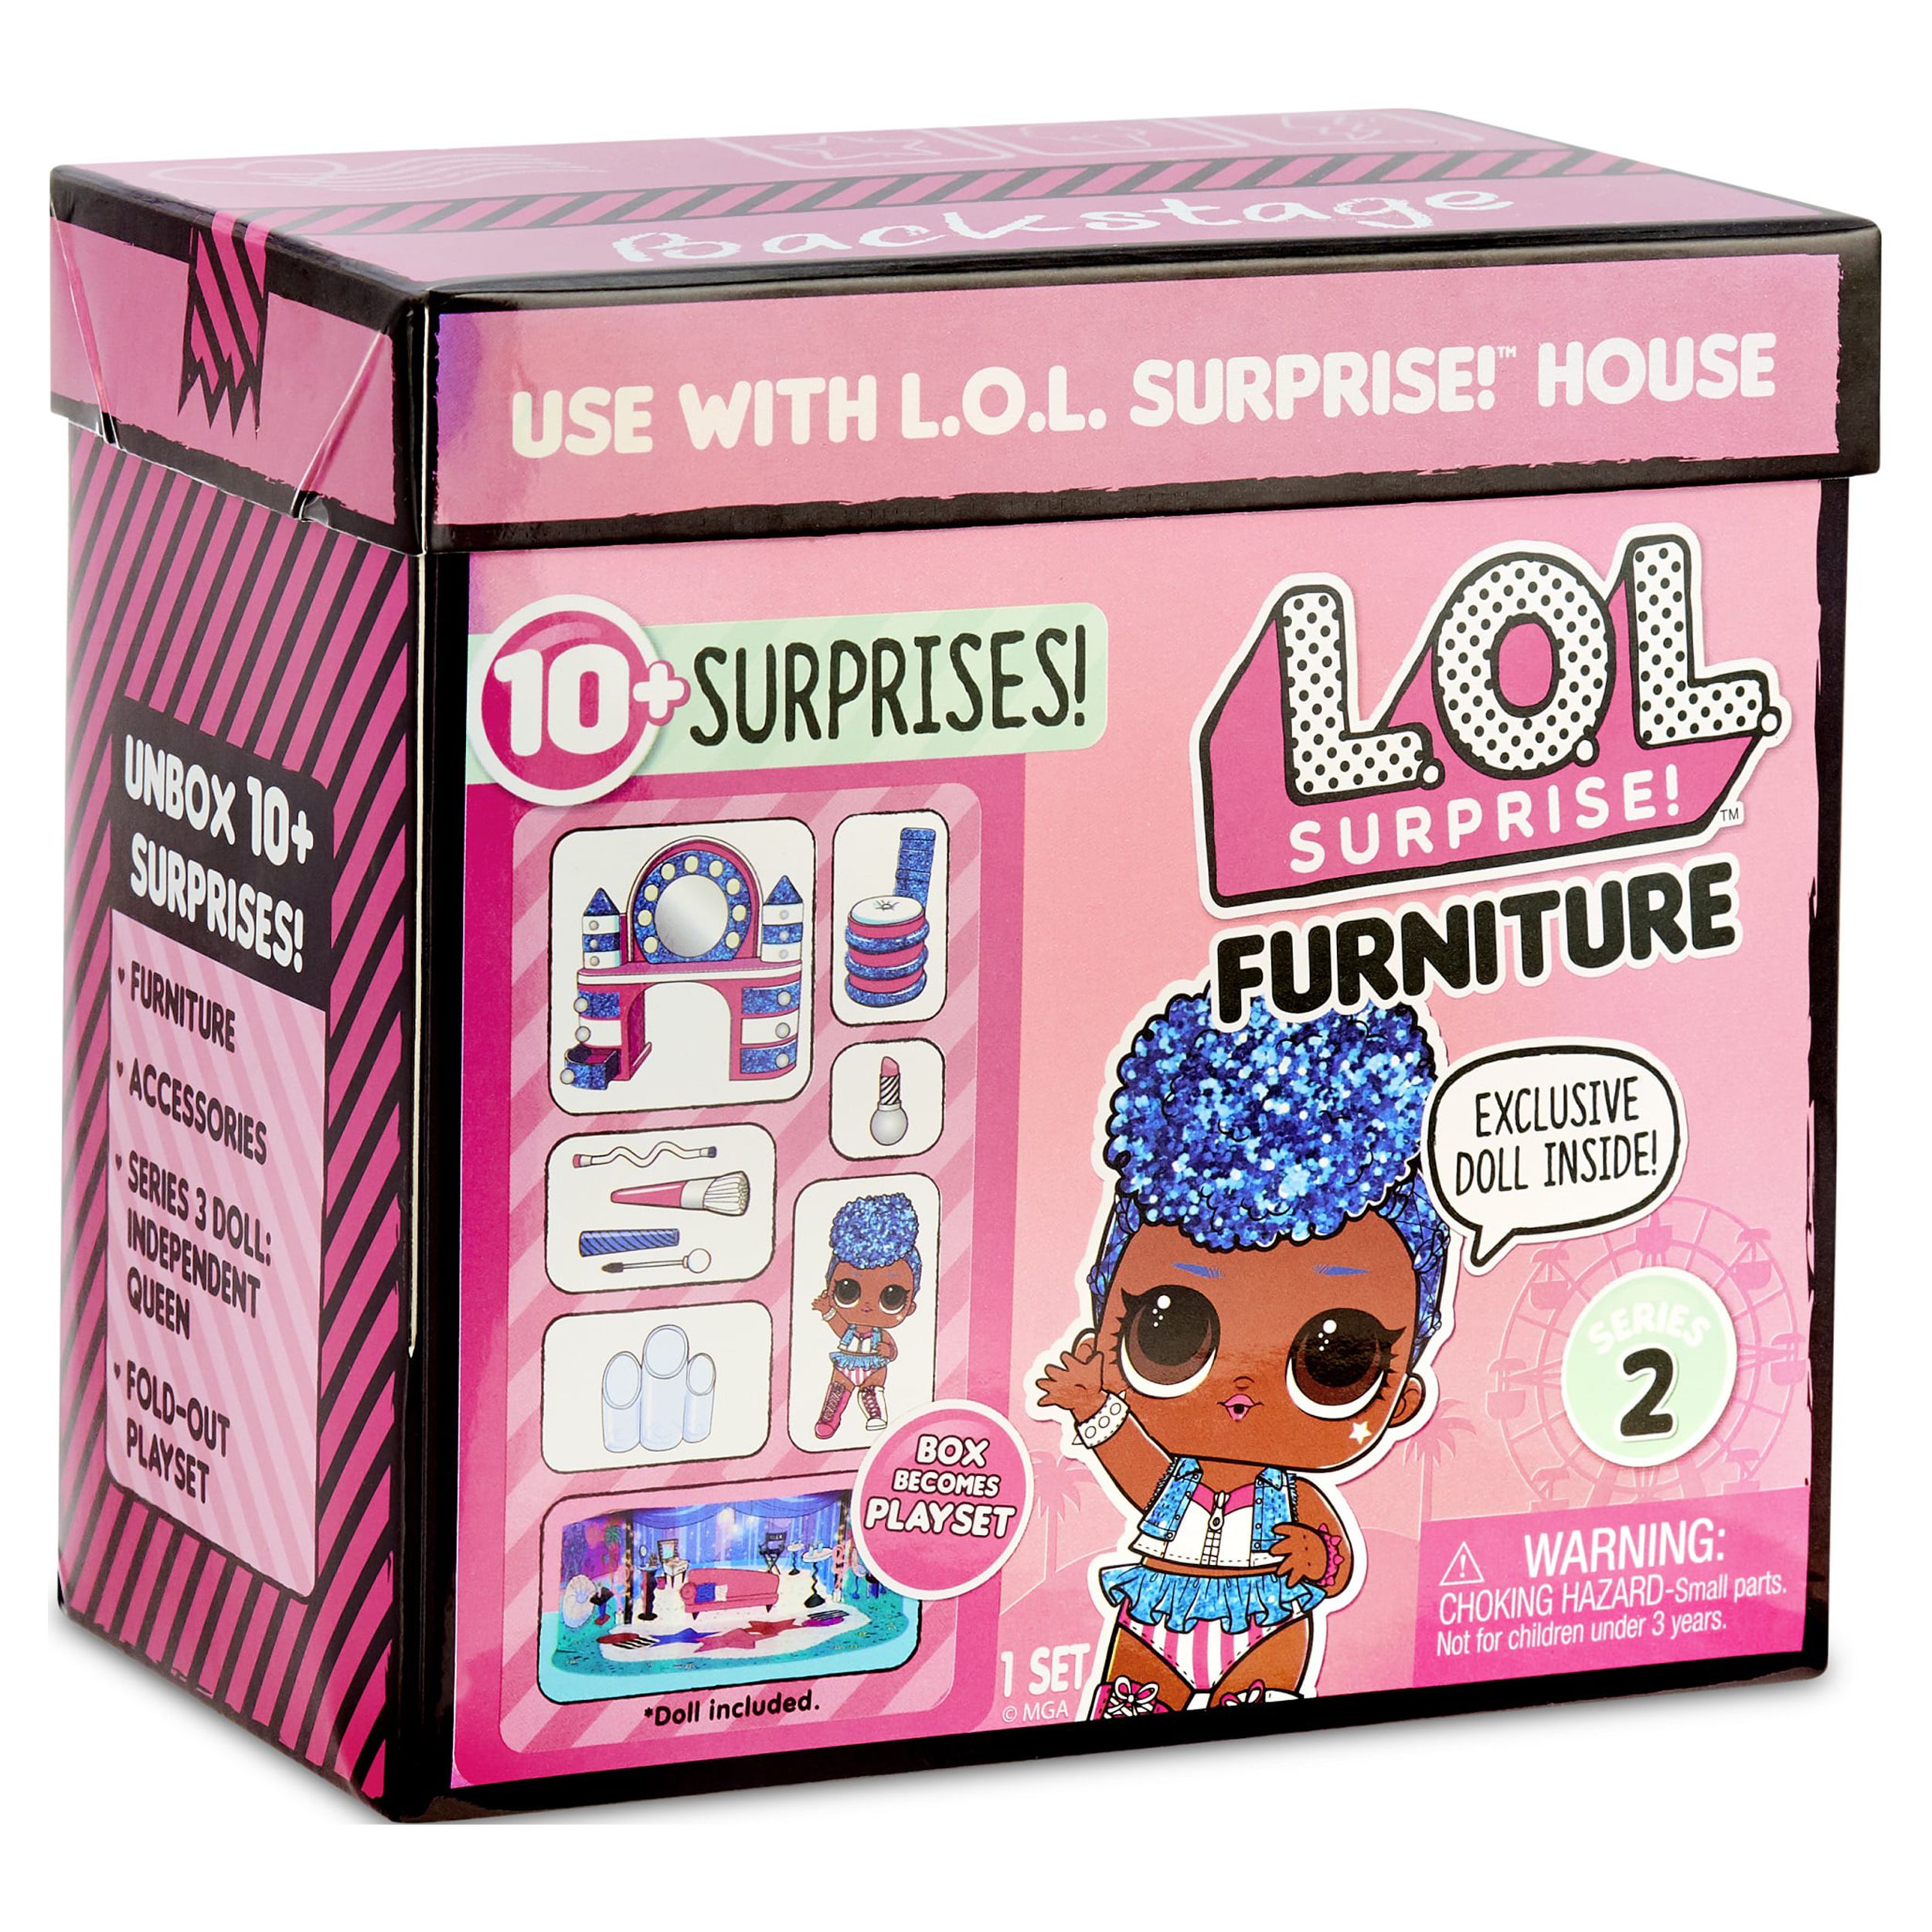 L.O.L. Surprise! Furniture Backstage with Independent Queen & 10+ Surprises - image 6 of 6